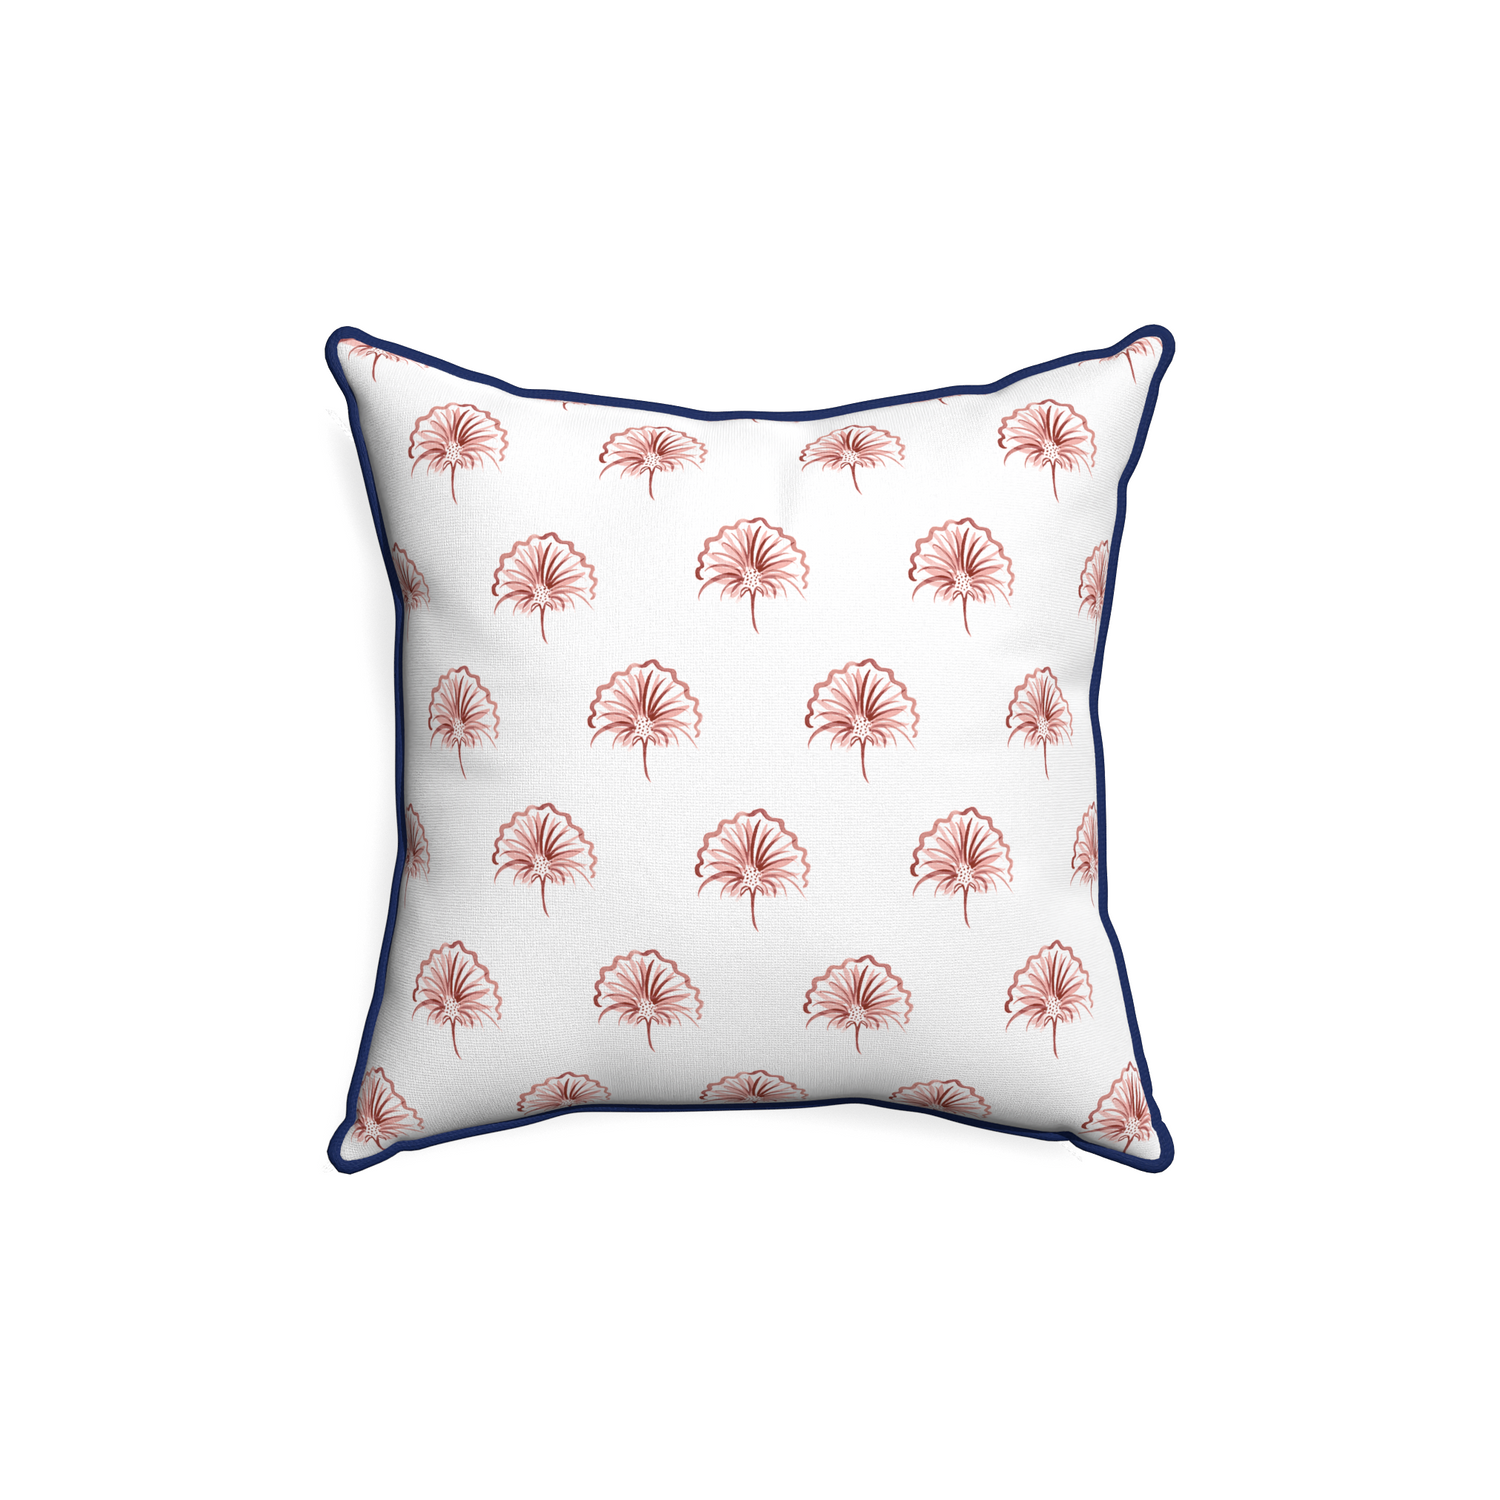 18-square penelope rose custom floral pinkpillow with midnight piping on white background